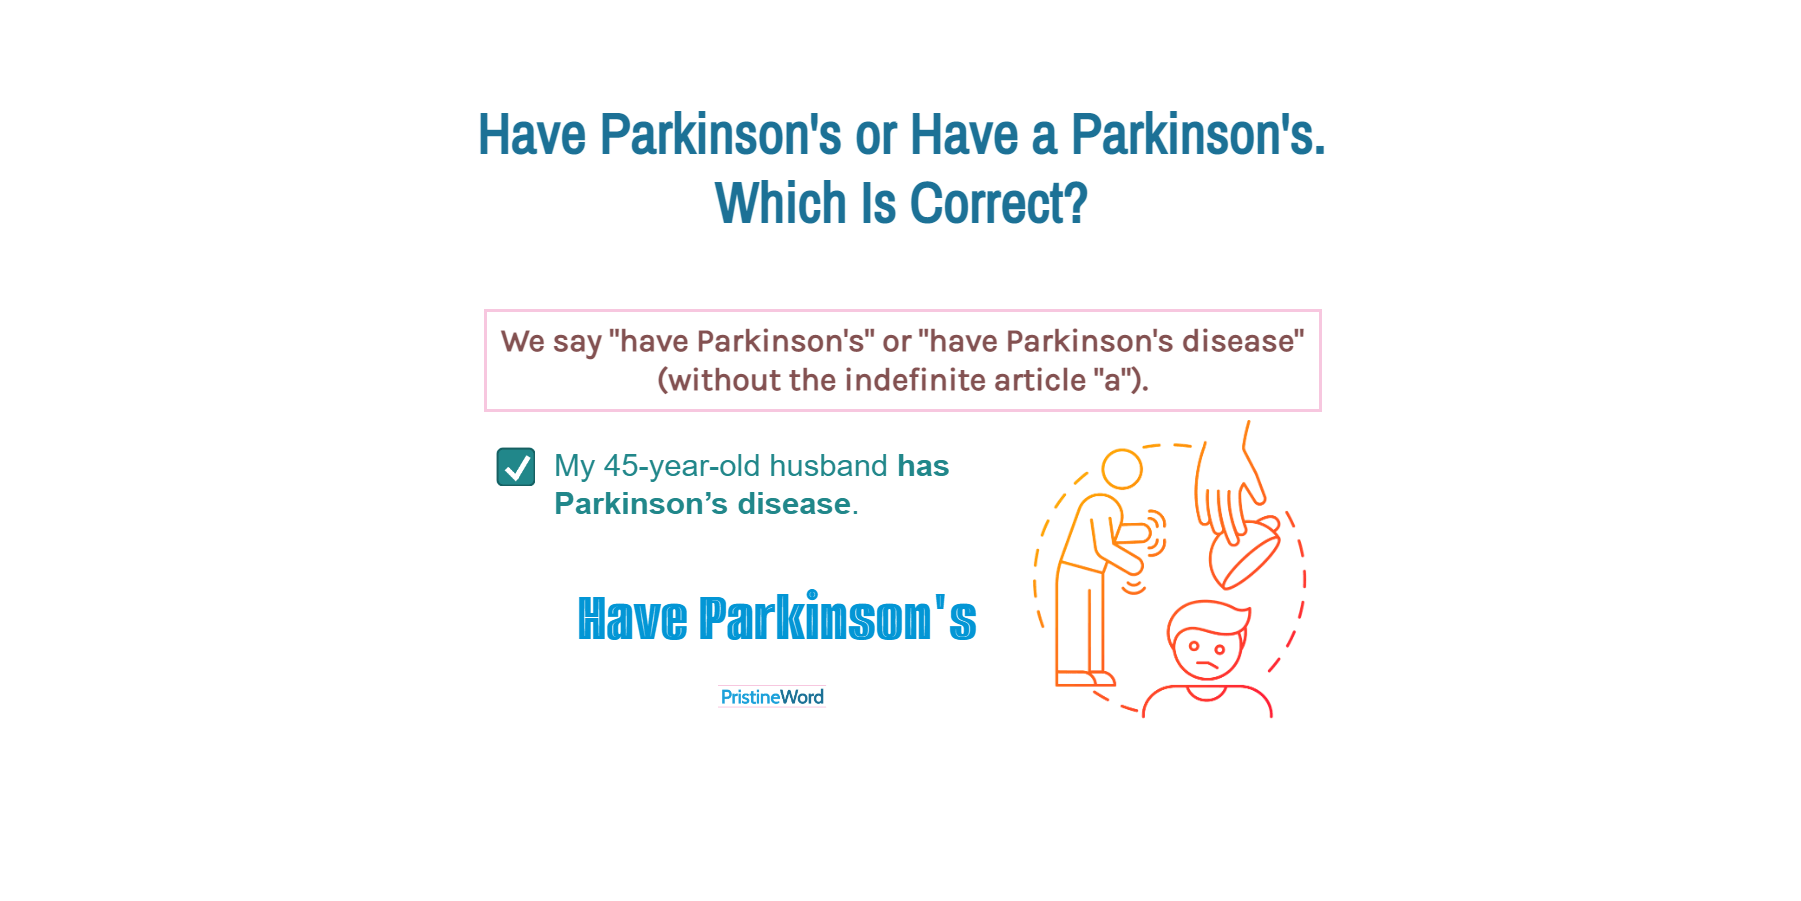 Have Parkinson's or Have a Parkinson's. Which Is Correct?